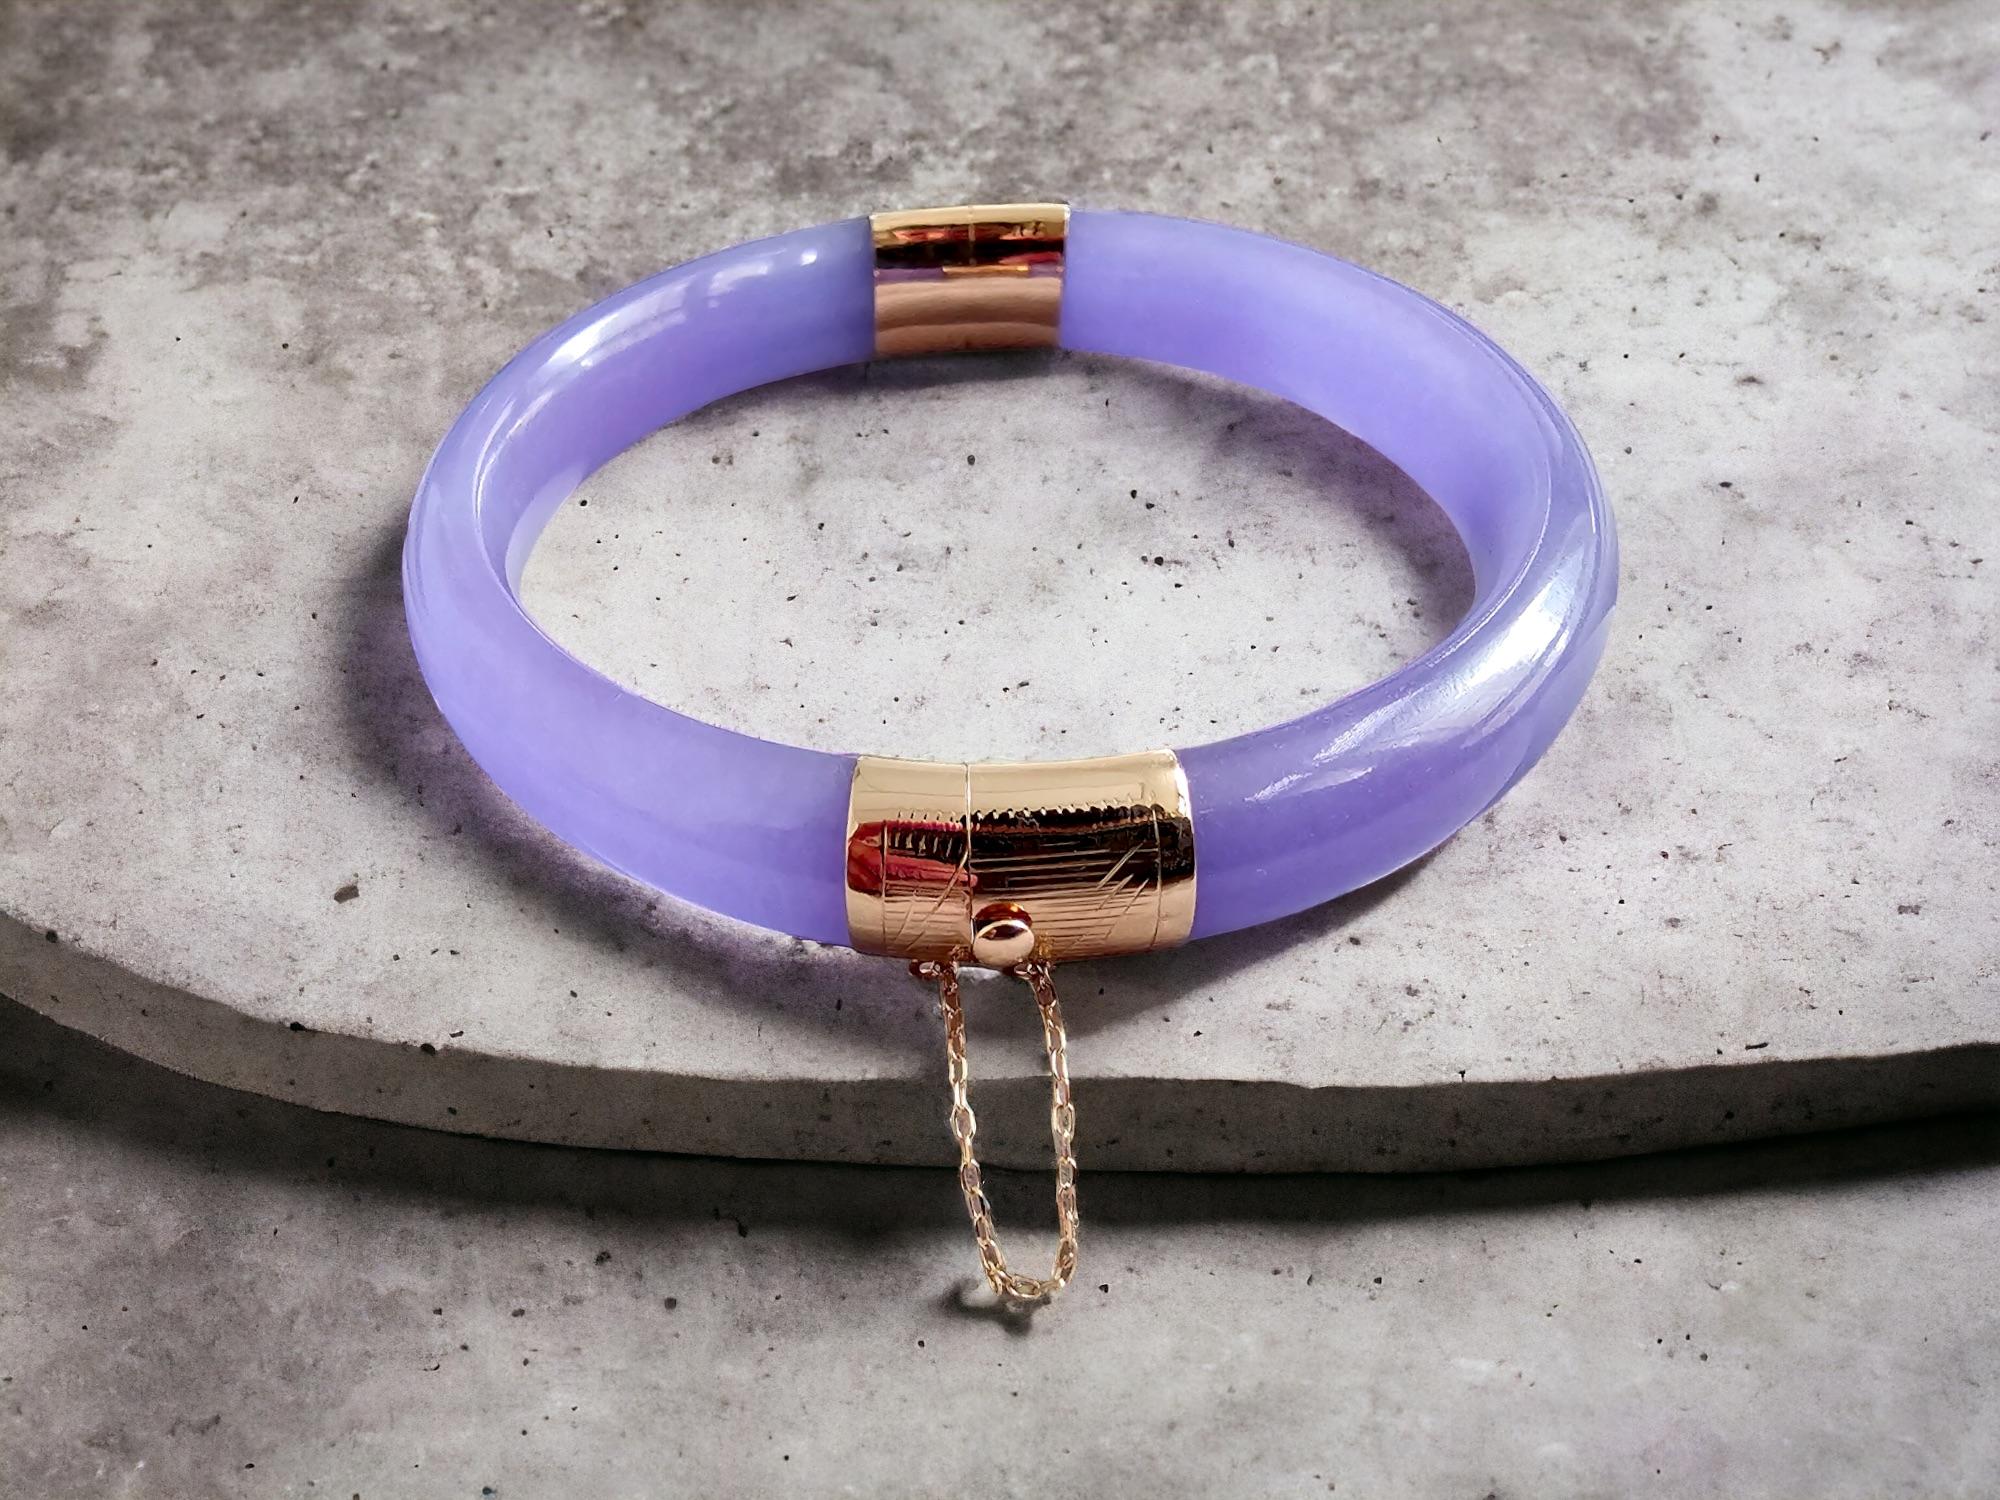 Viceroy's Circular Lavender Jade Bangle Bracelet (with 14K Yellow Gold) For Sale 4